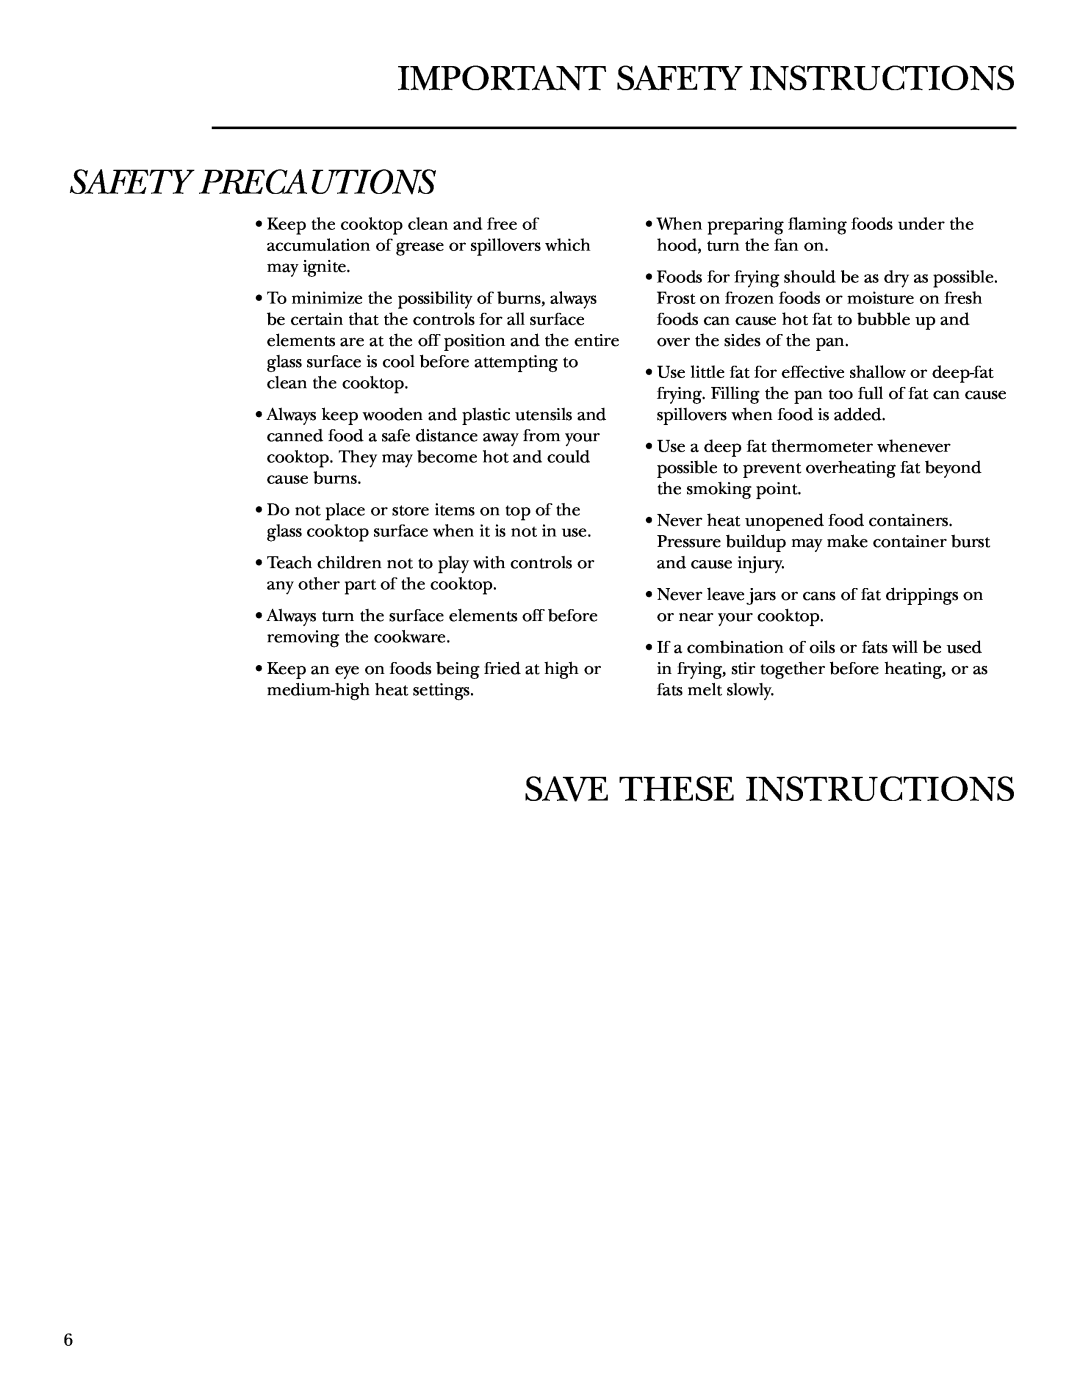 GE ZEU36K owner manual Save These Instructions, Important Safety Instructions, Safety Precautions 